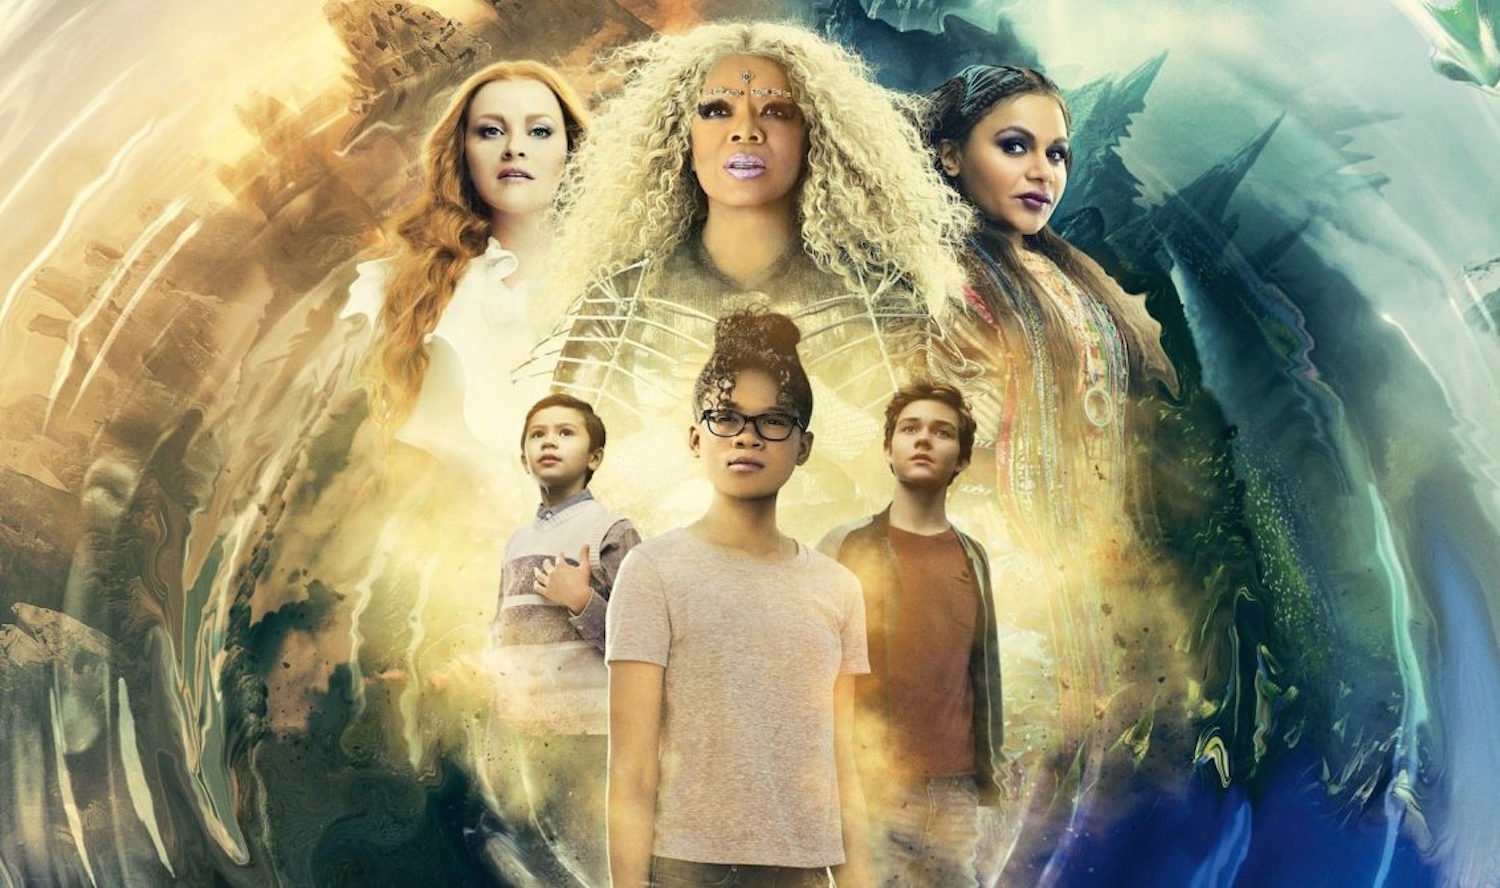 a wrinkle in time movie